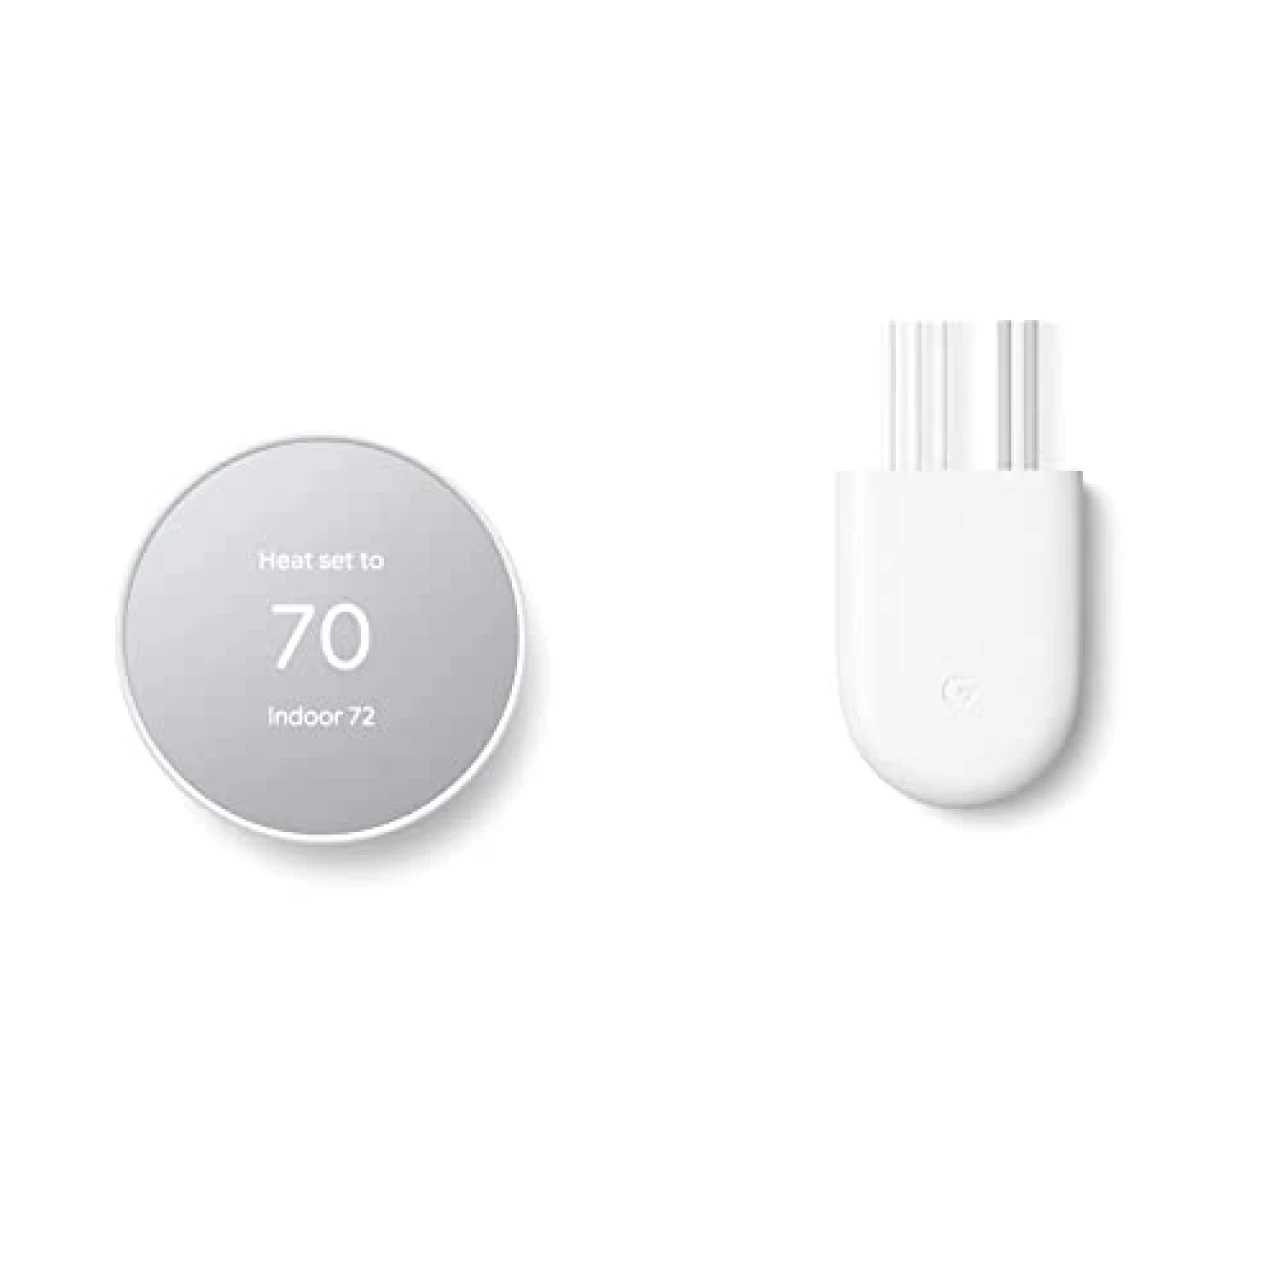 Google Nest Thermostat - Smart Thermostat for Home - Programmable WiFi Thermostat - Snow